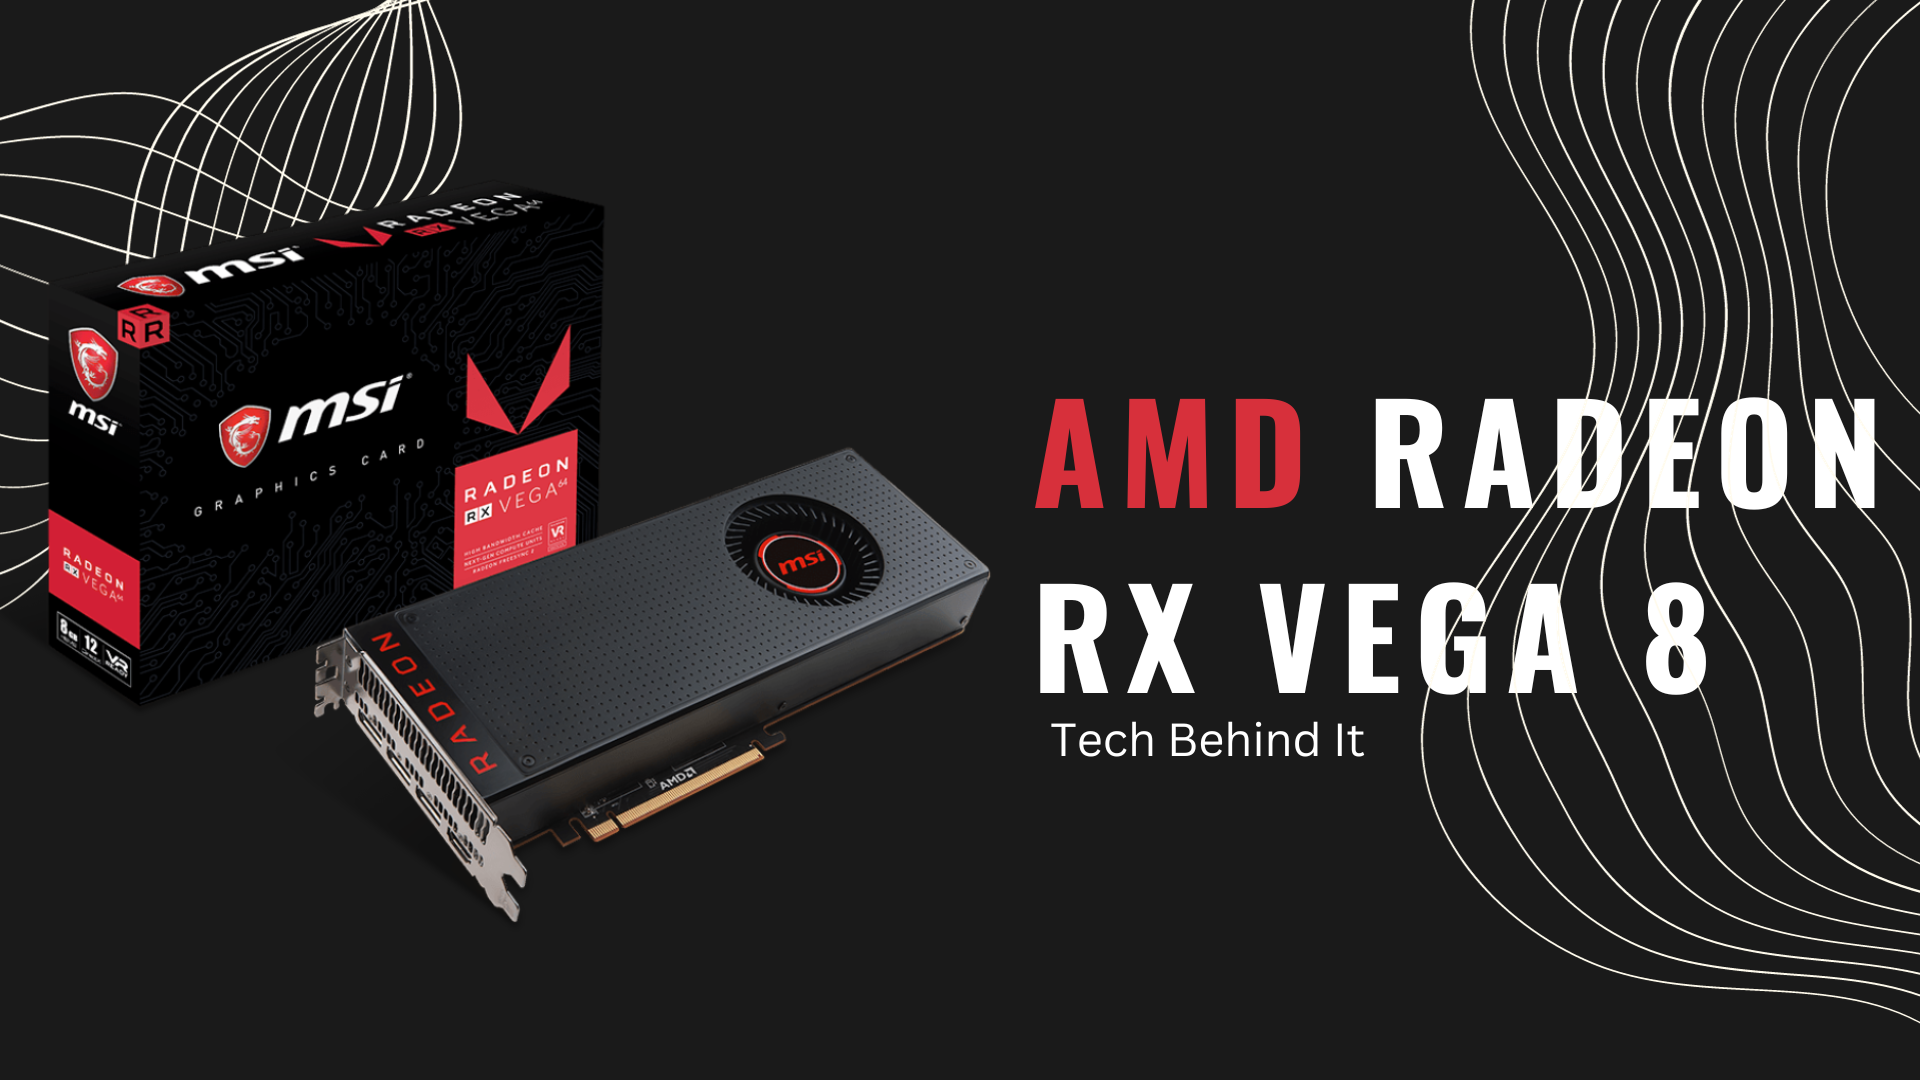 Performance and Feature Analysis of the AMD Radeon Vega 8